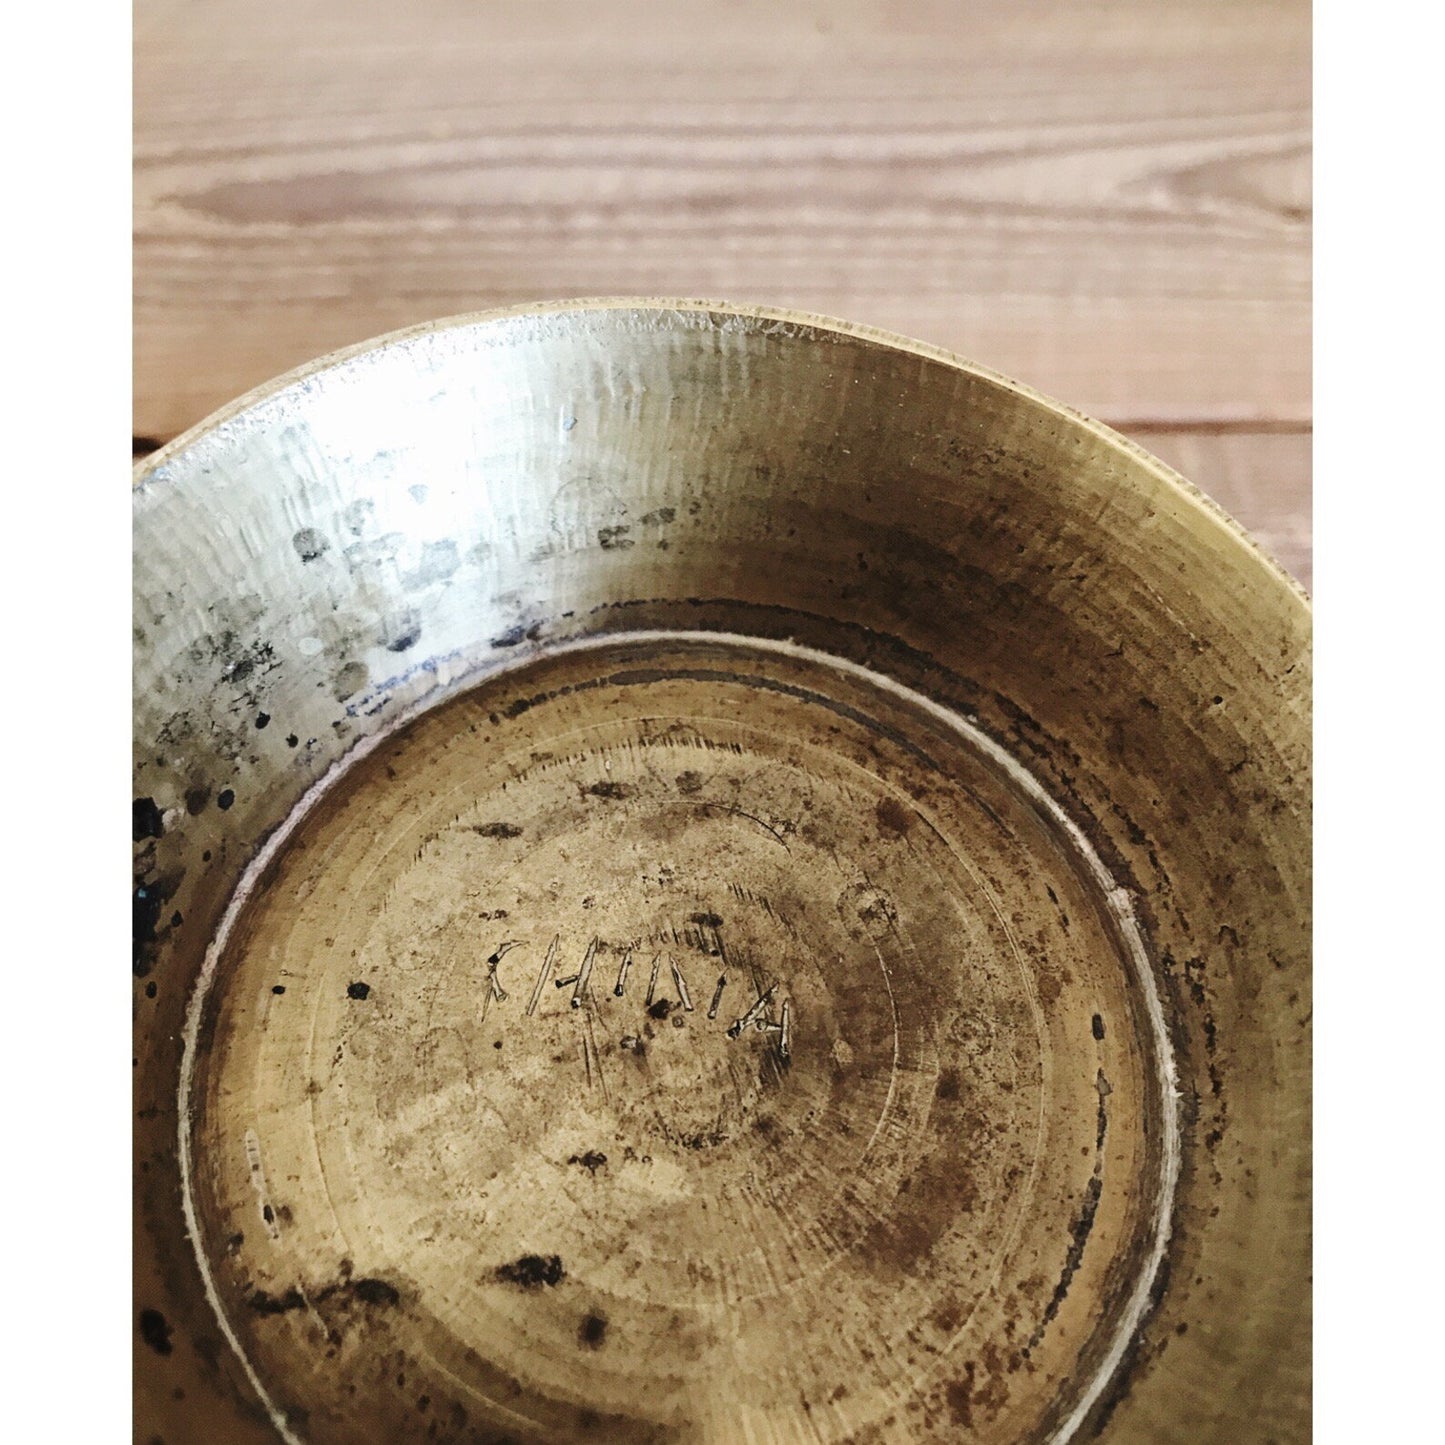 Etched Brass Footed Bowl / Decorative Vintage Brass Bowl